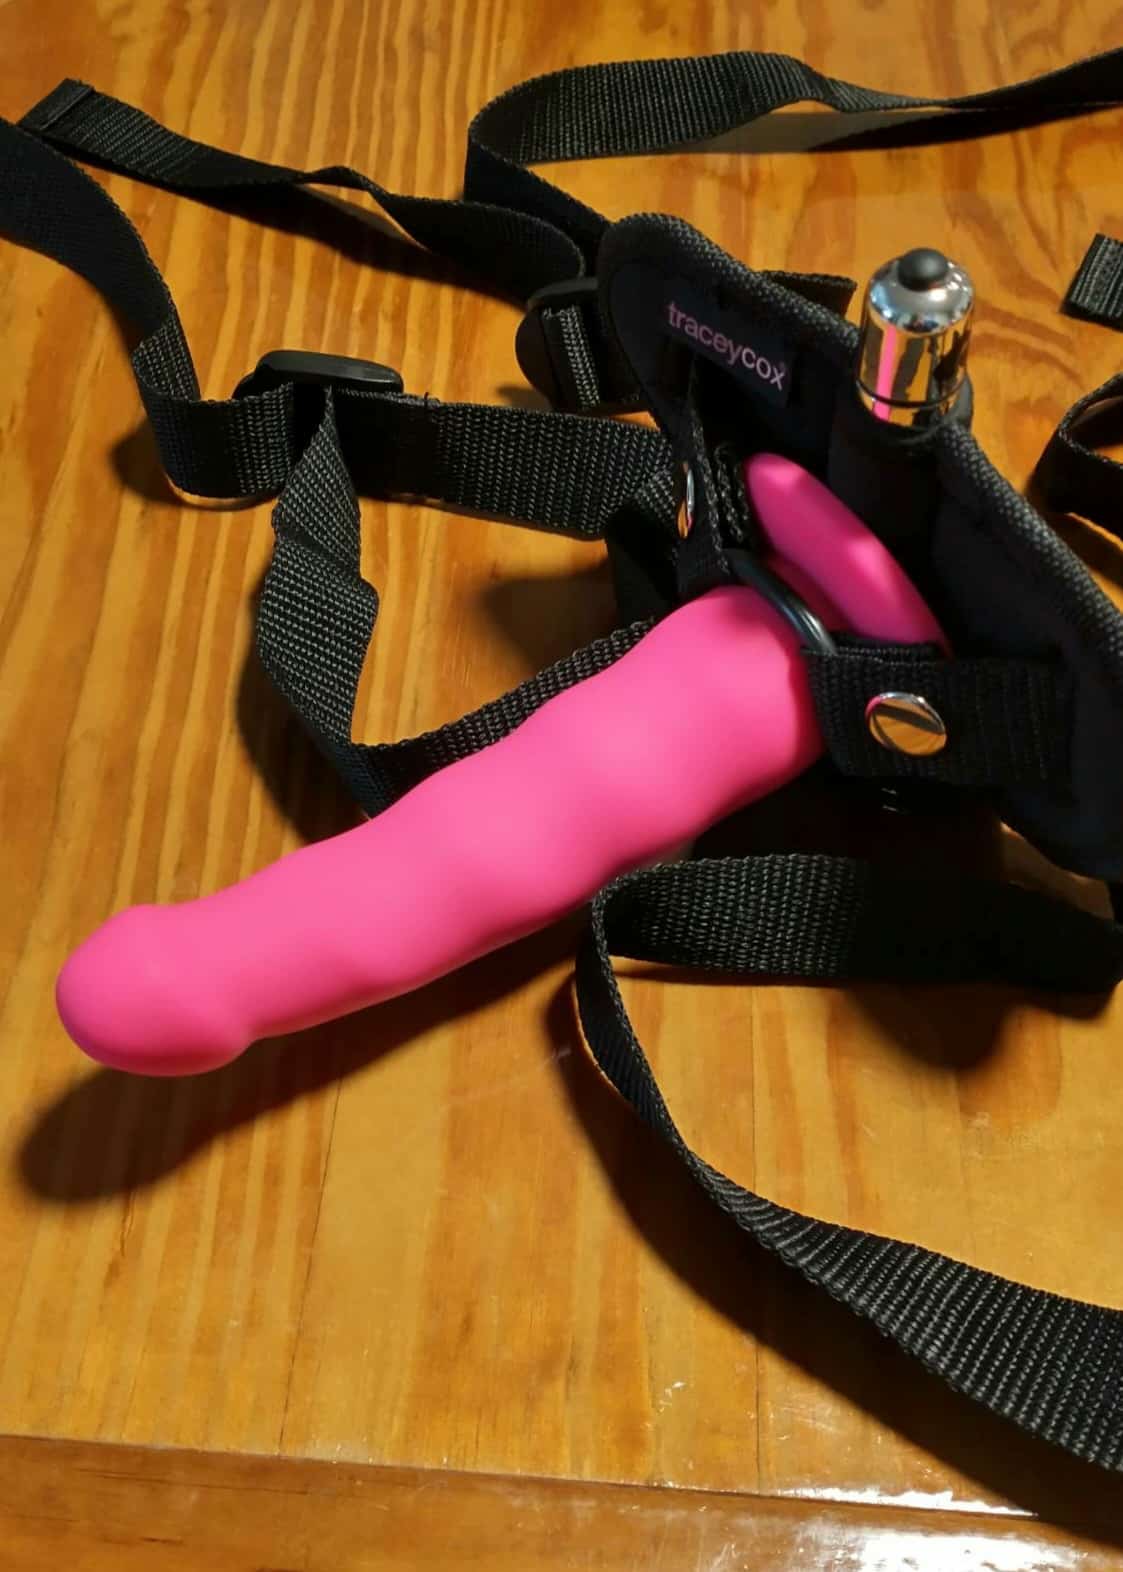 Tracey Cox Supersex Pegging Kit. Slide 9